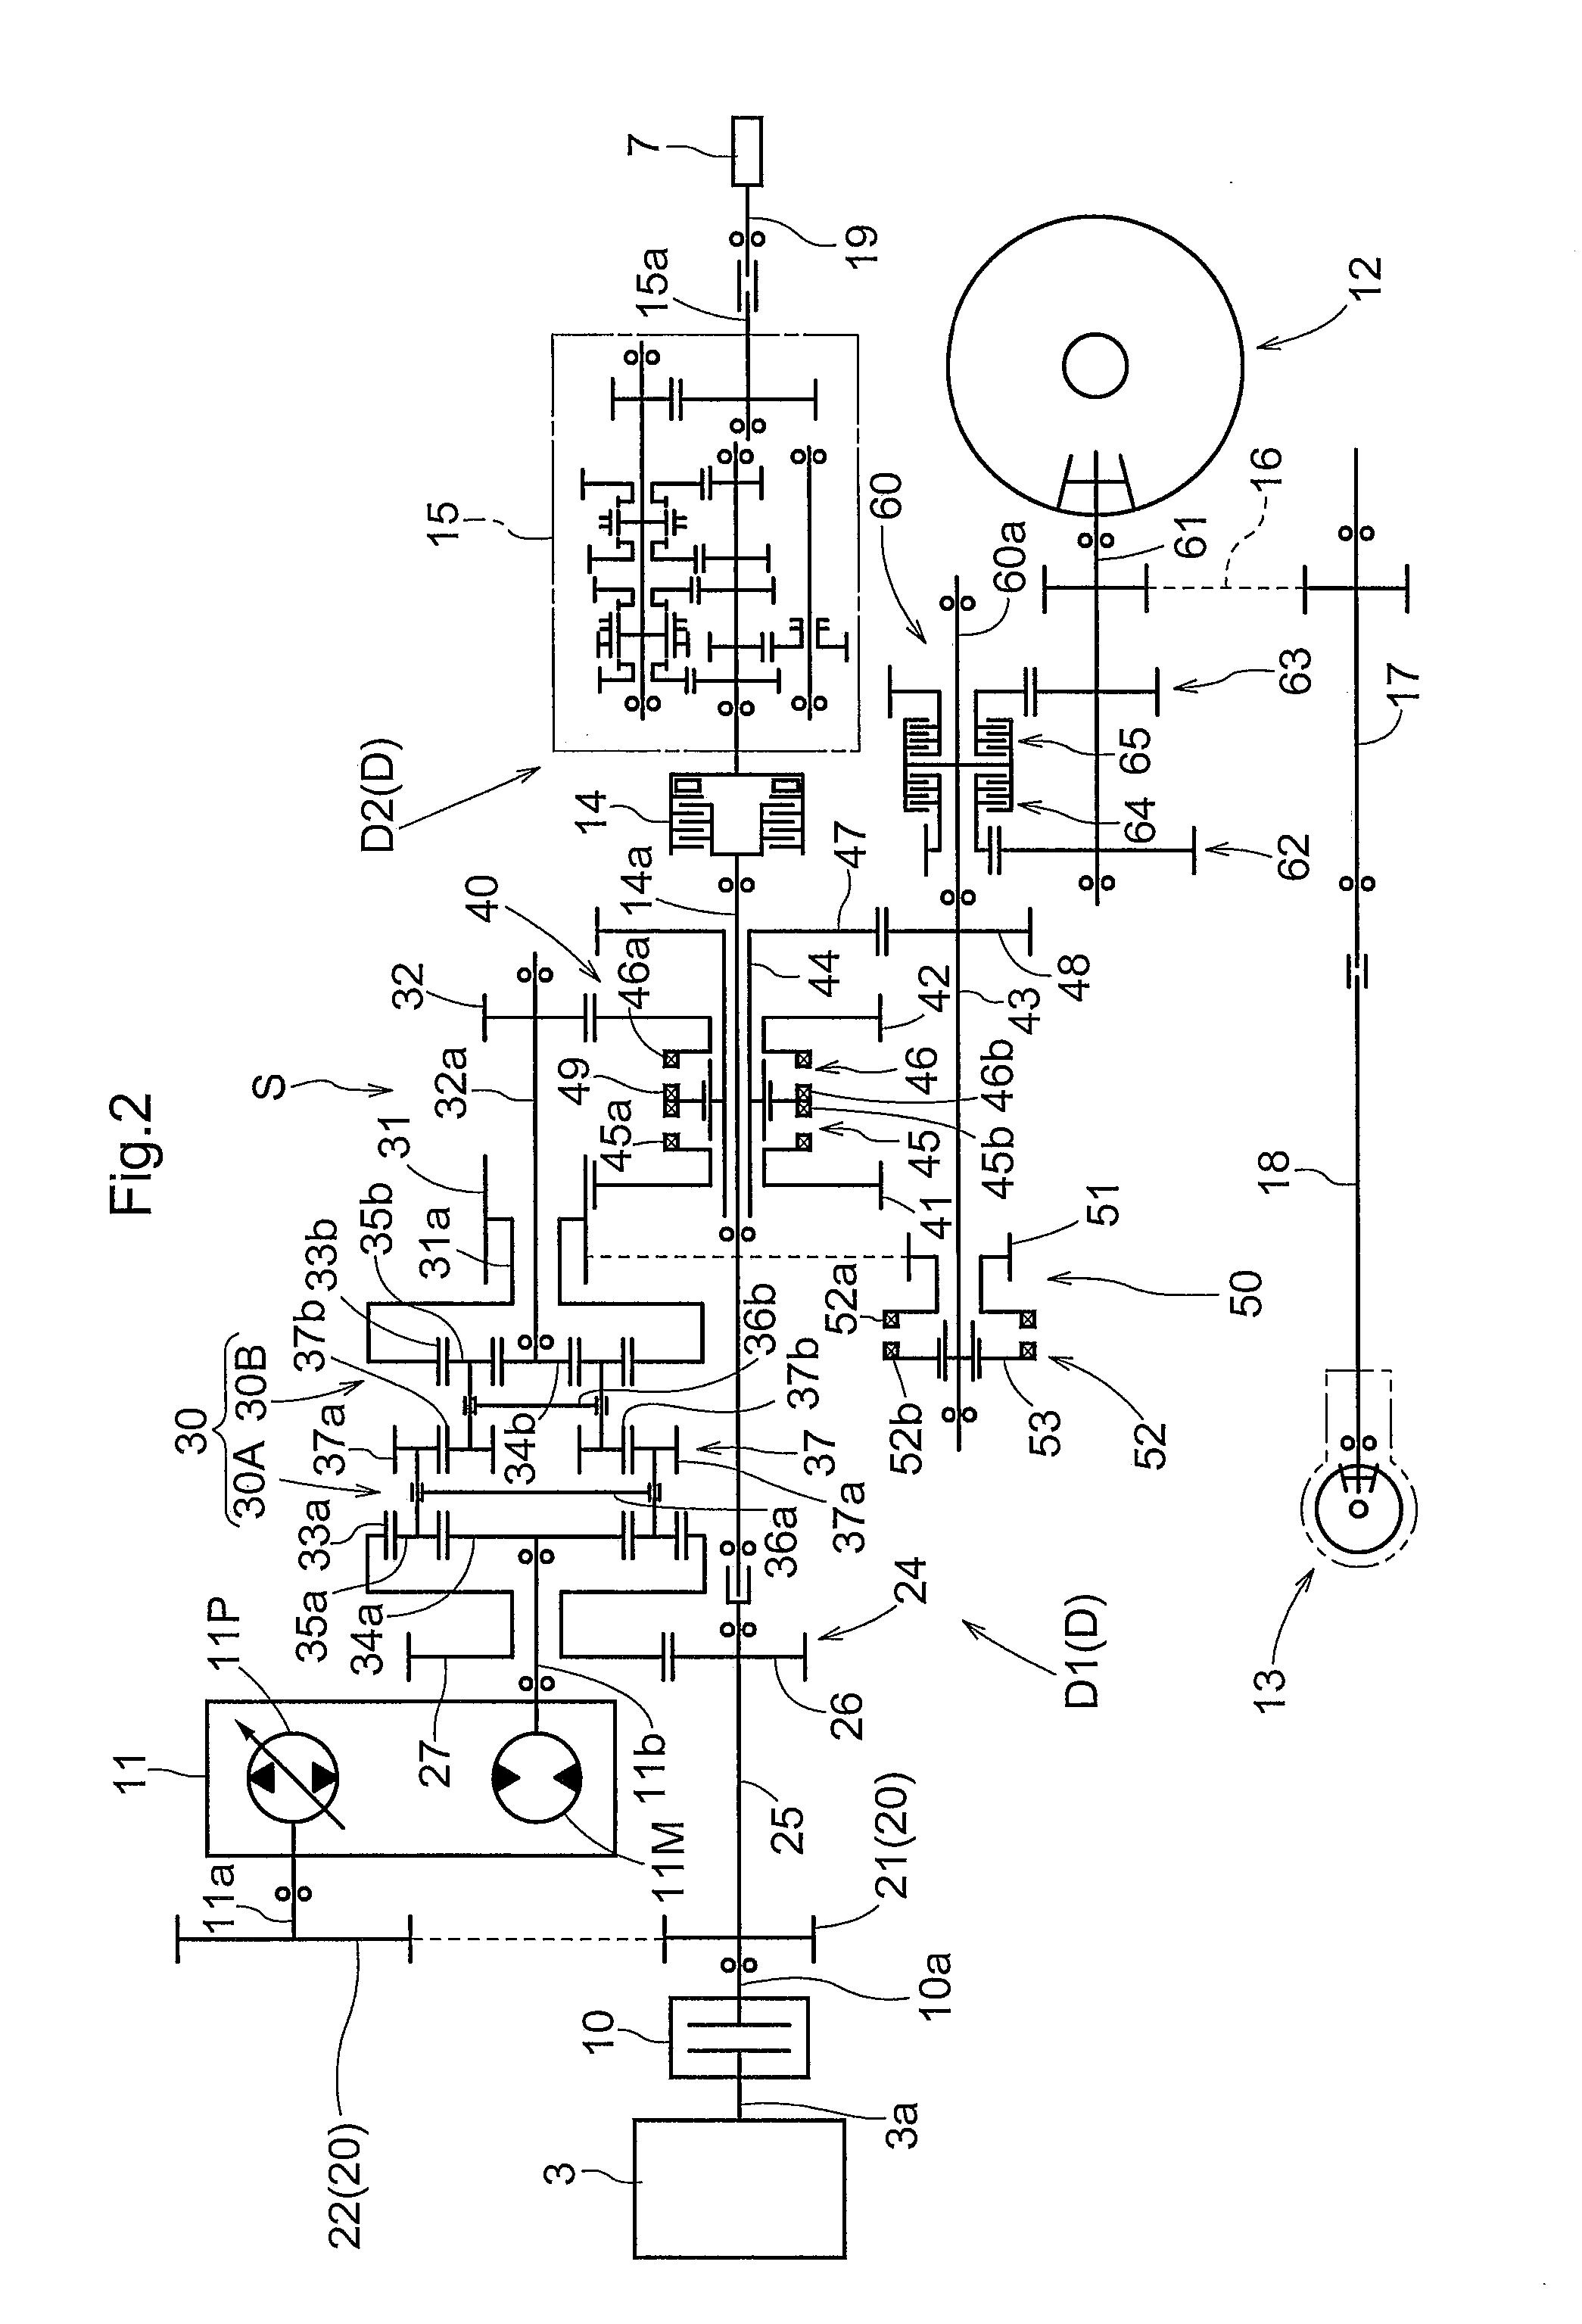 Transmission Apparatus for a Tractor